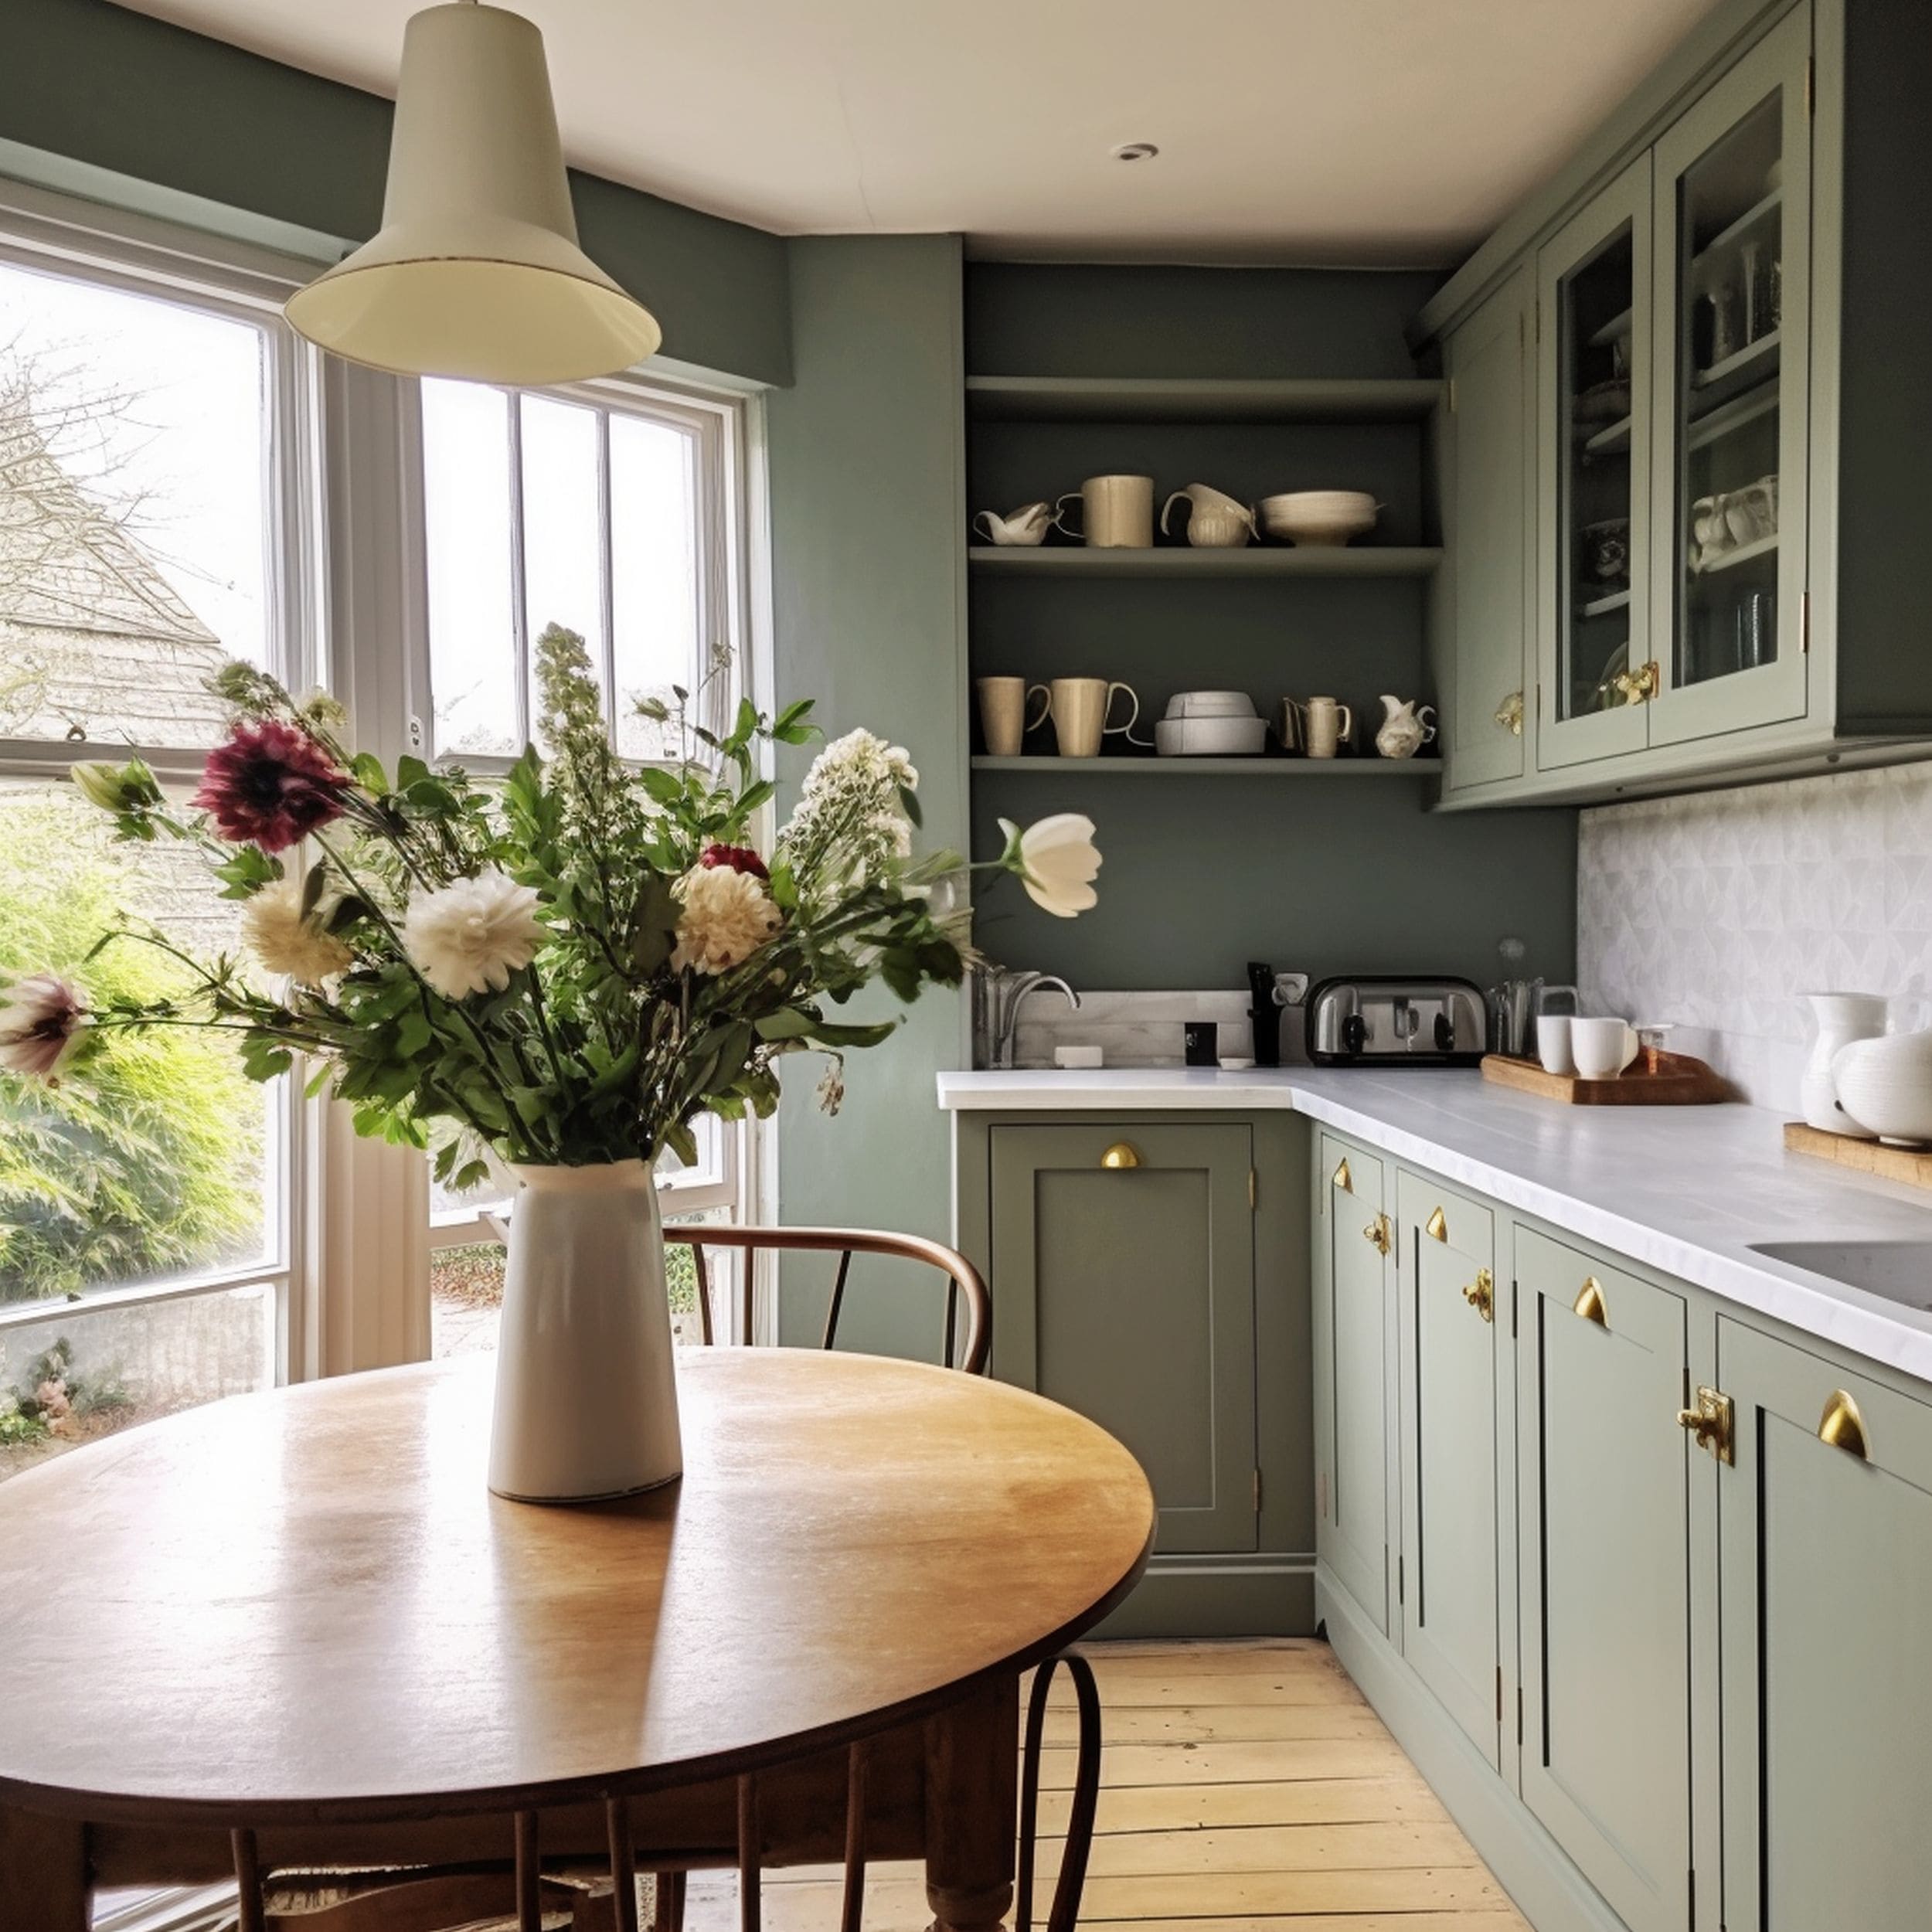 Kitchen With Sage Green Cabinets and Flowers